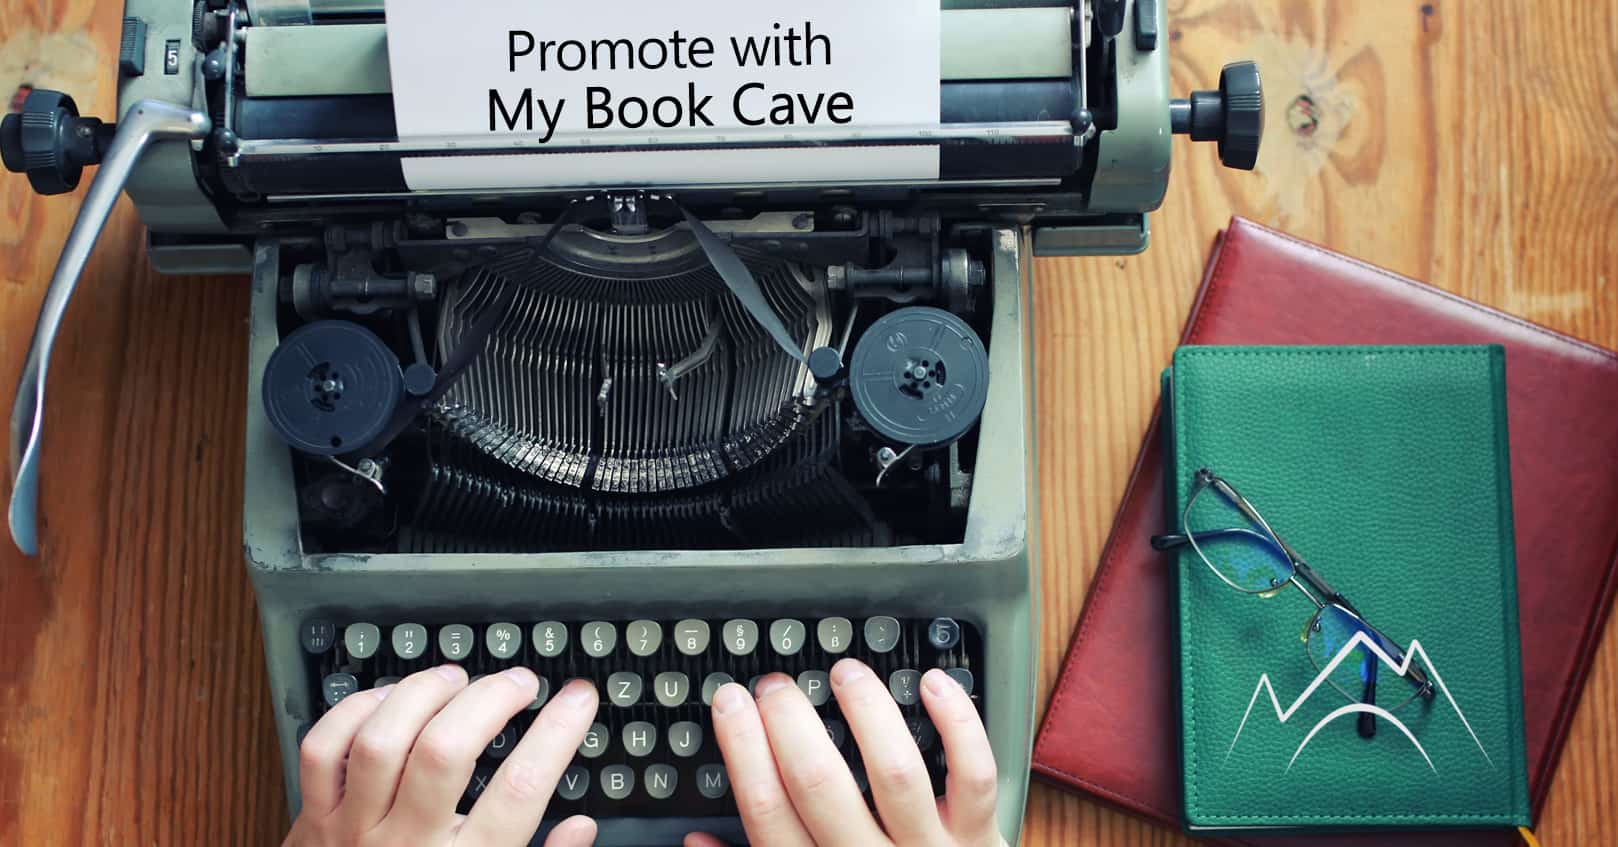 Why promote your books with My Book Cave